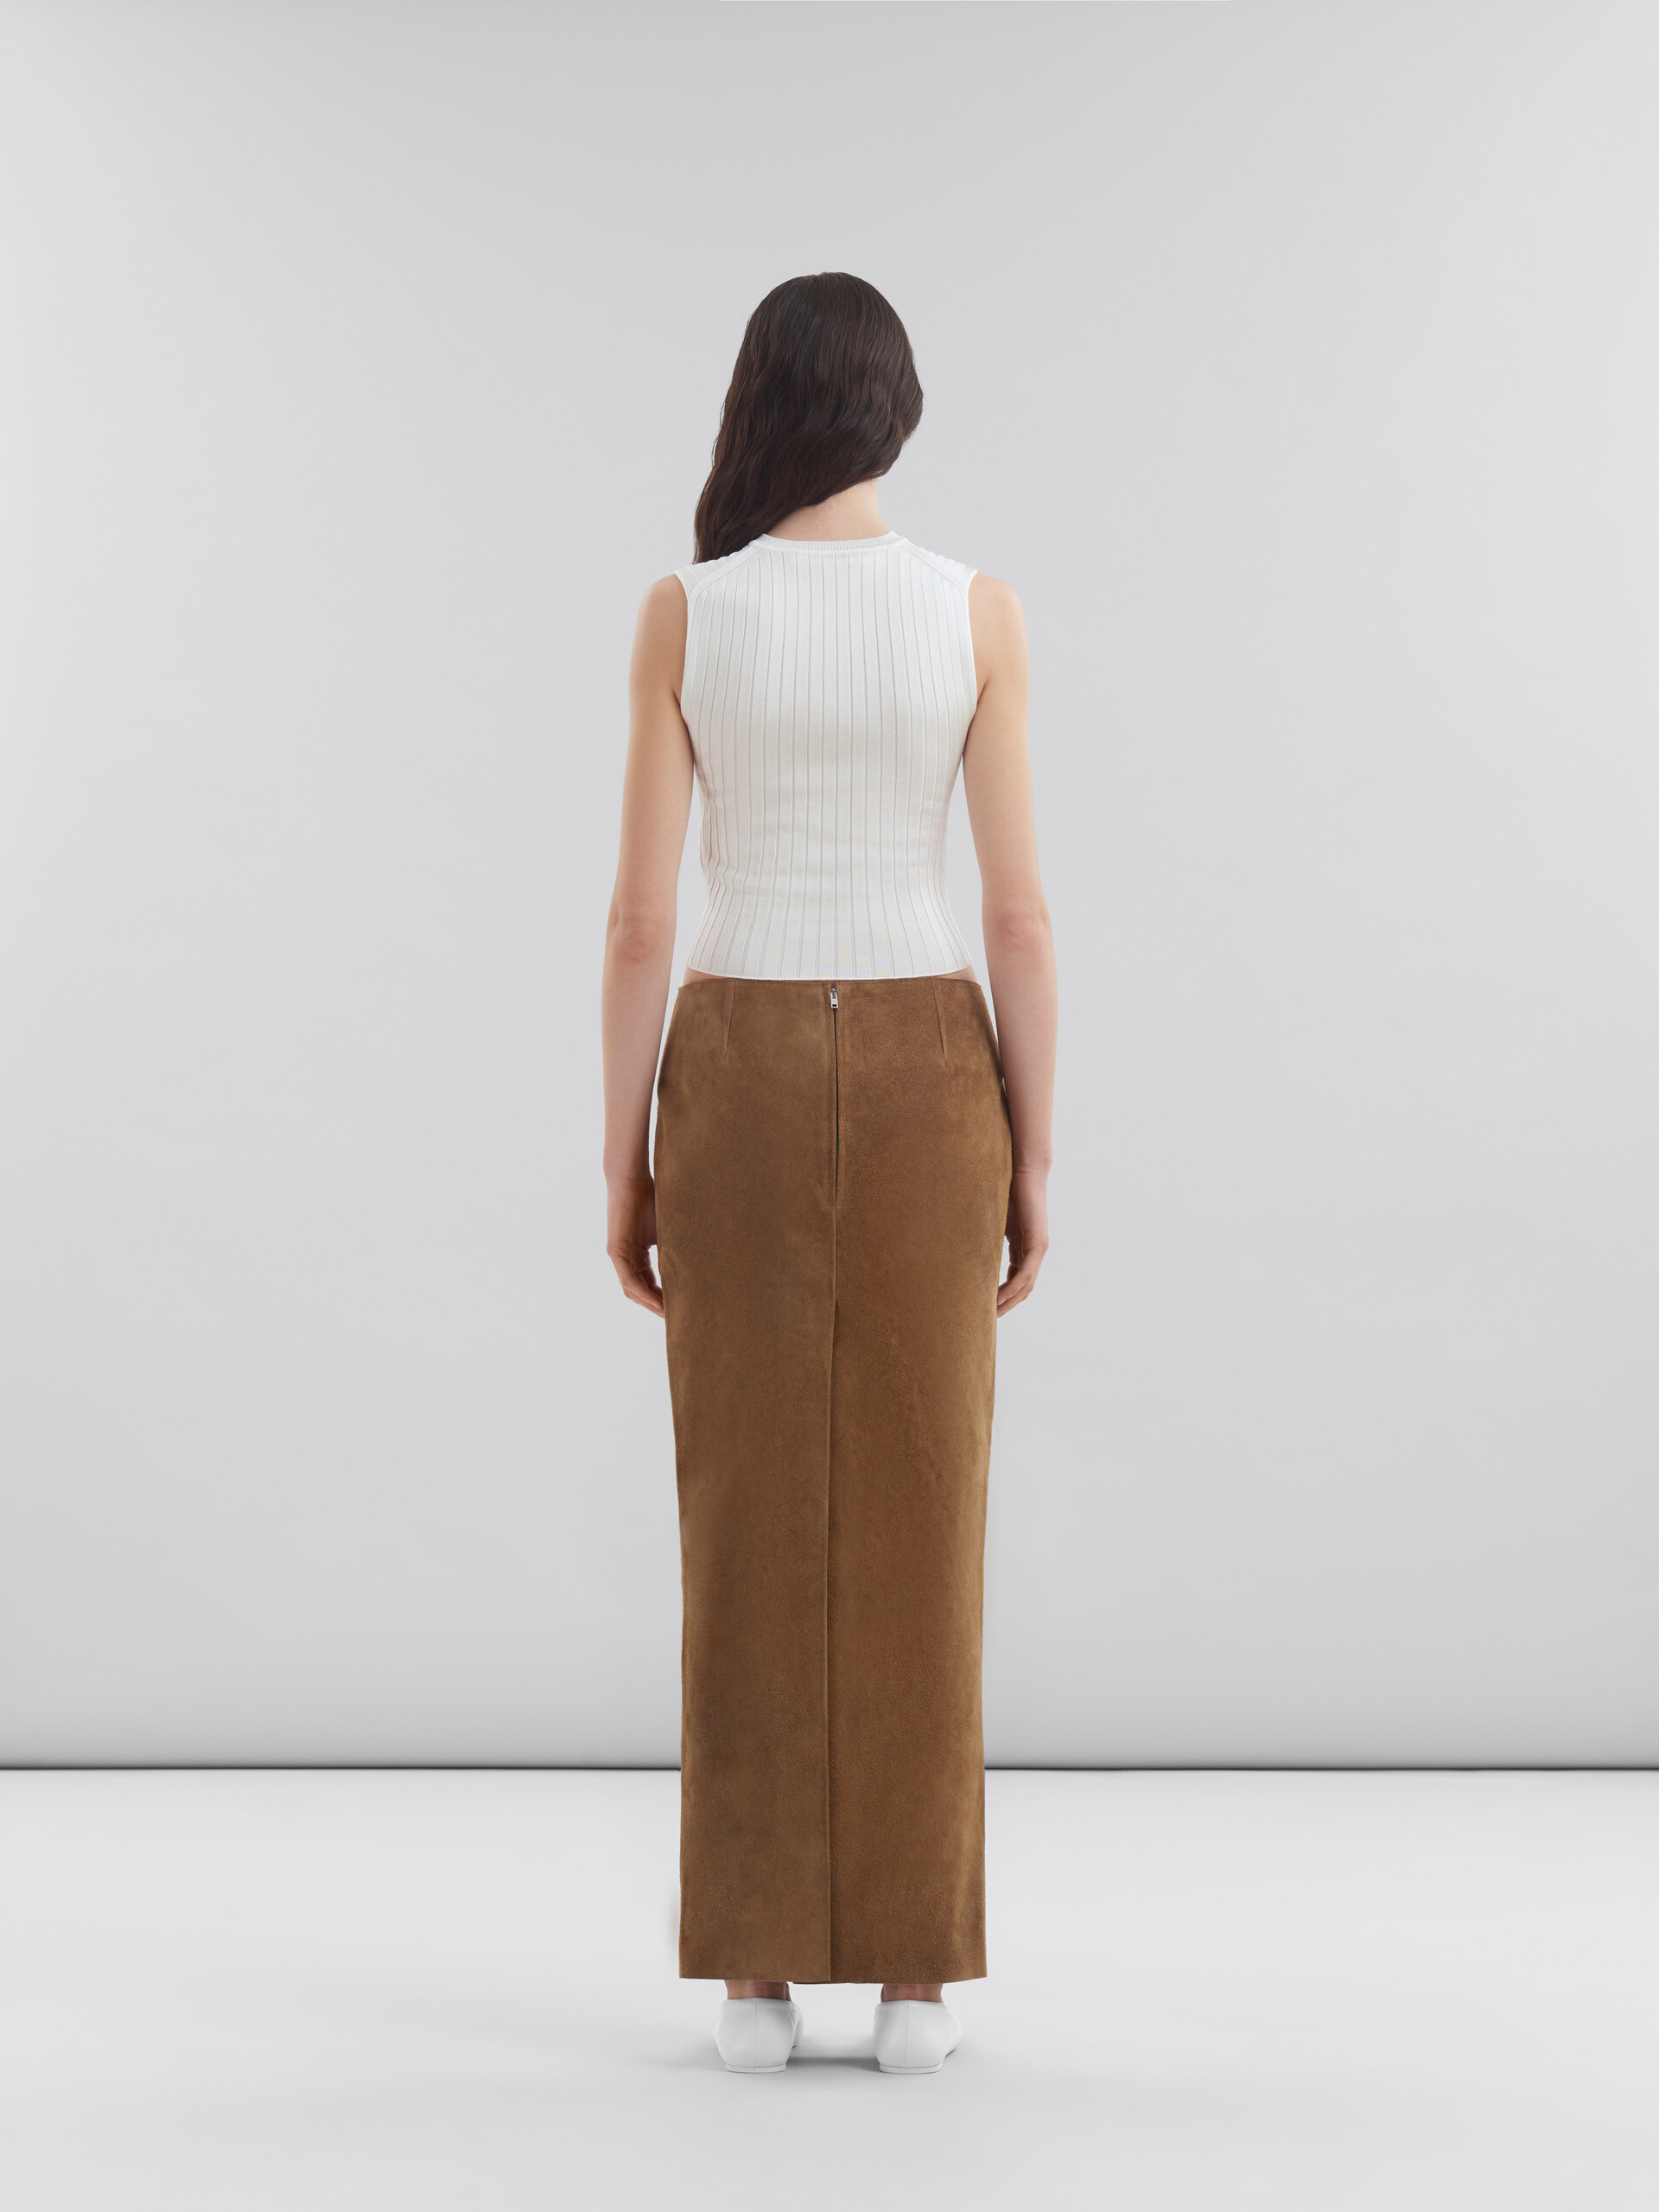 Brown suede leather pencil skirt - Skirts - Image 3